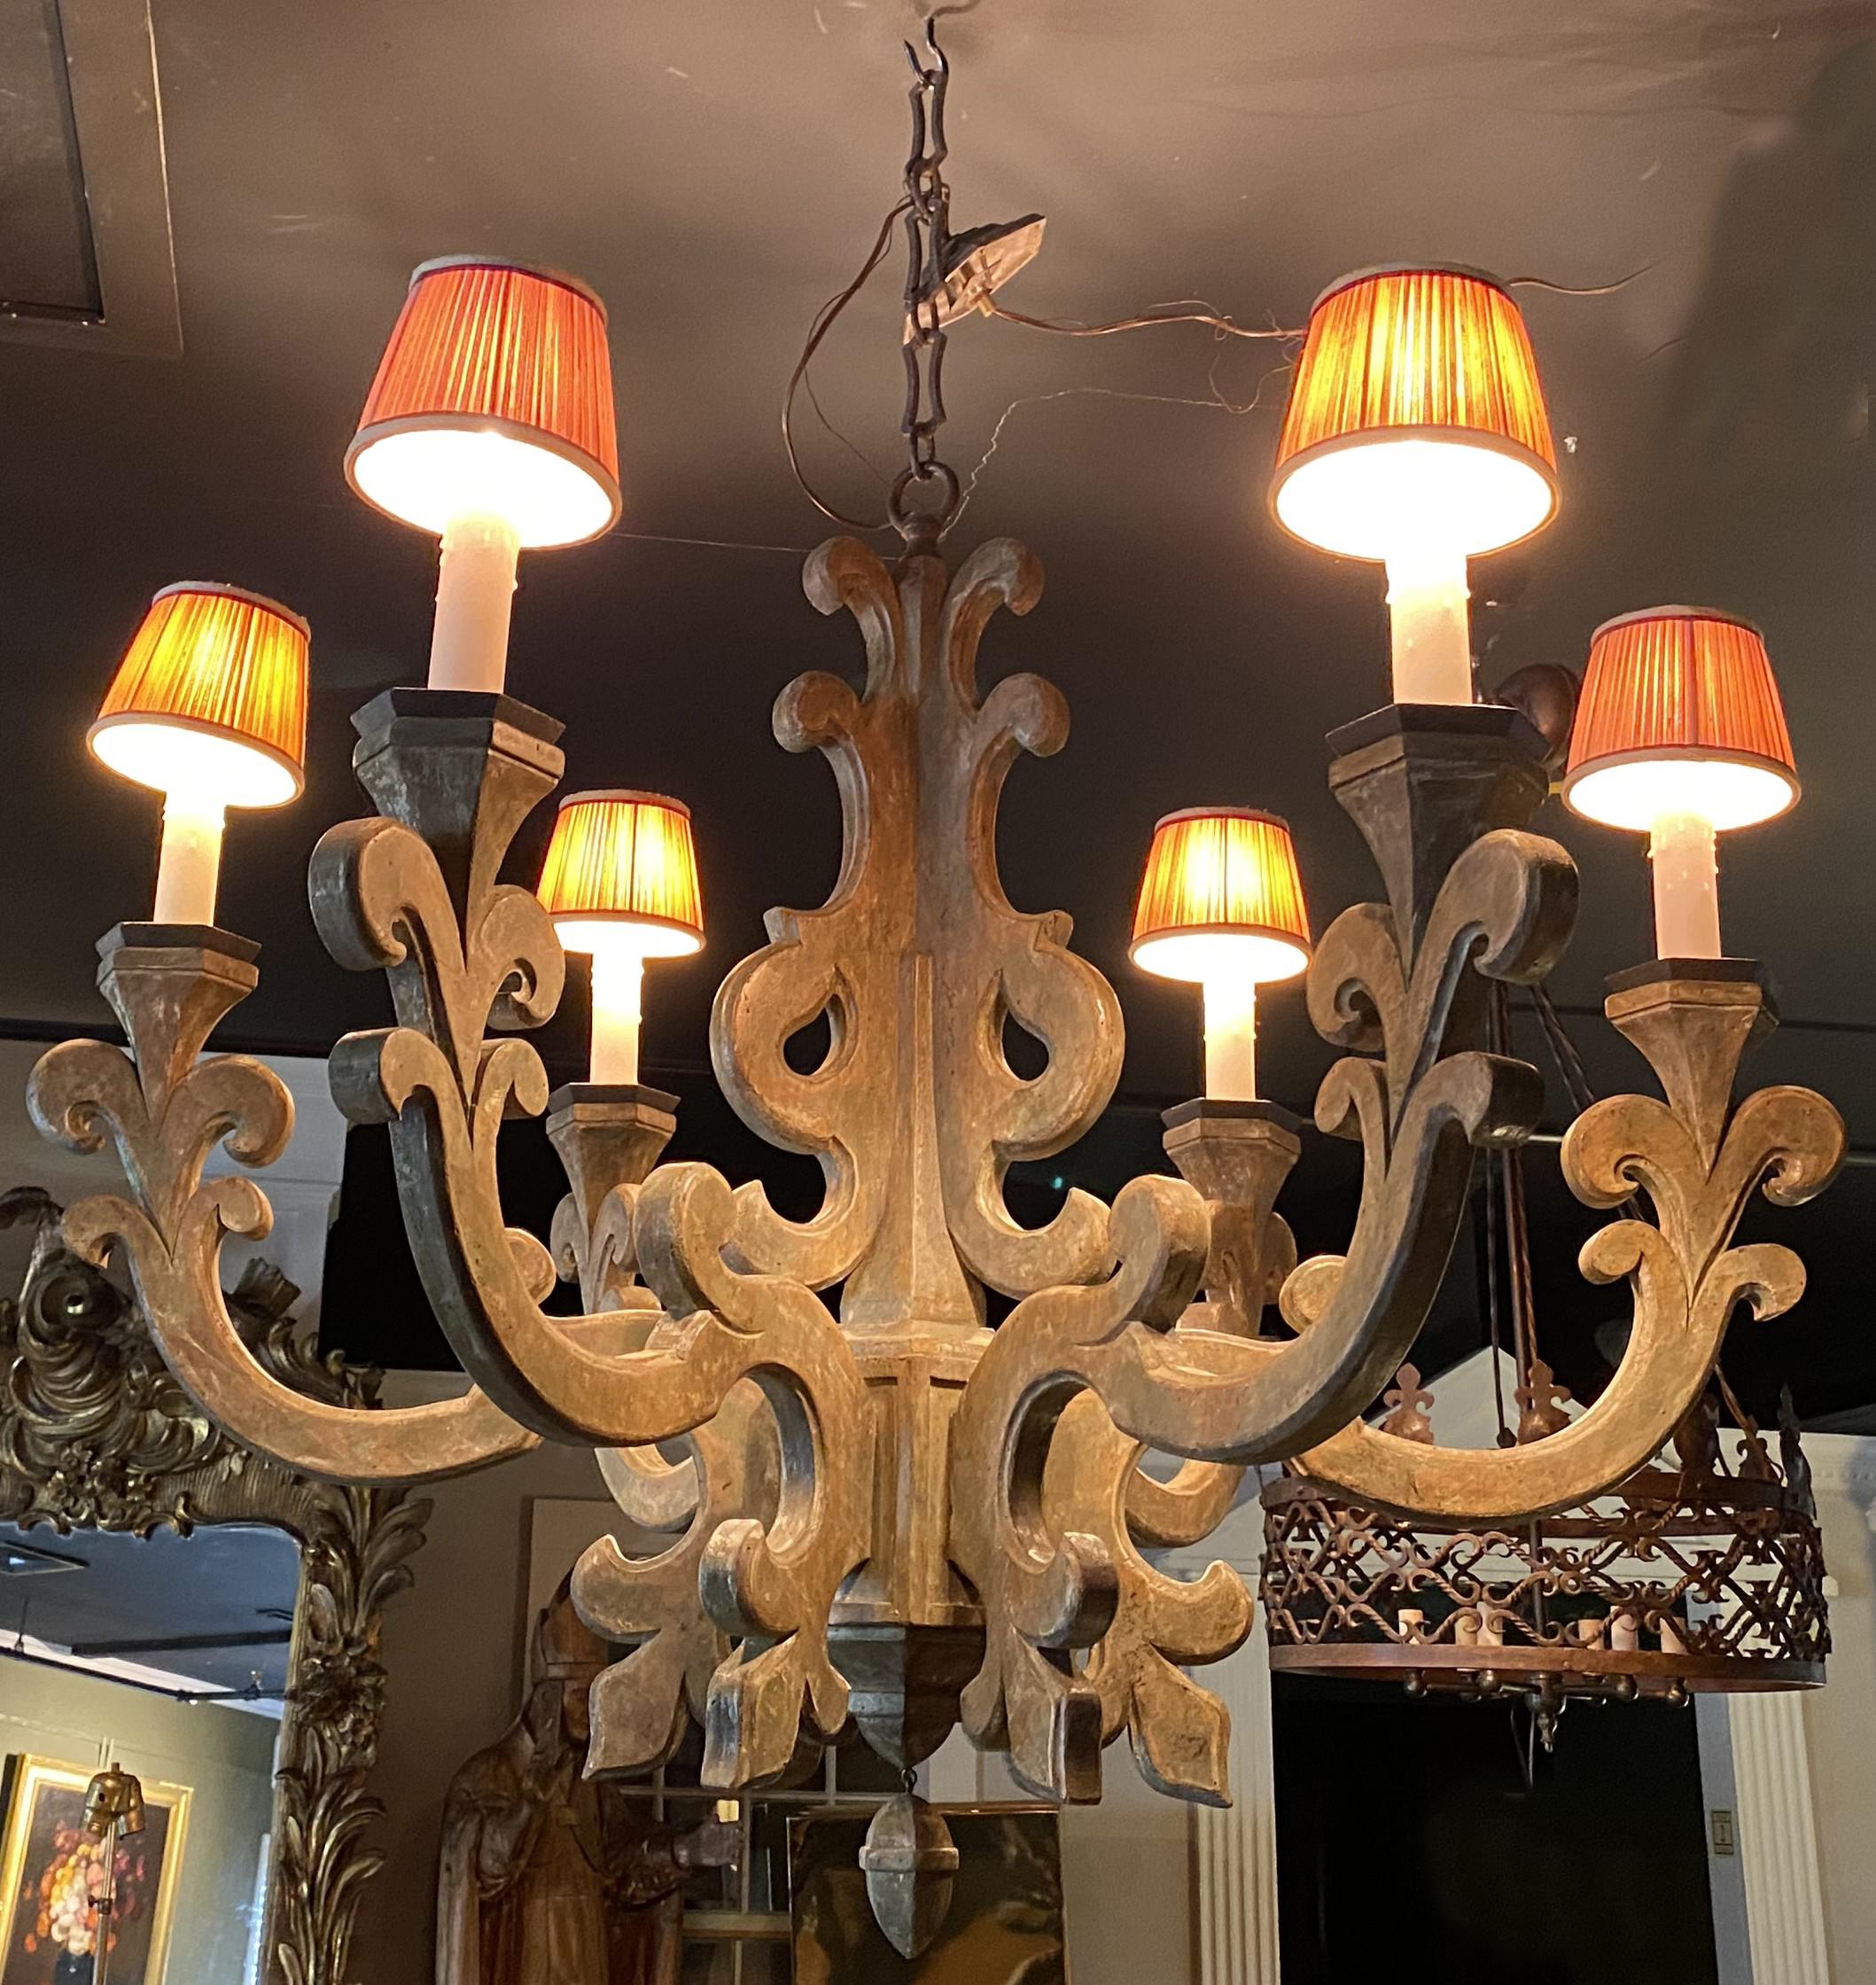 A wonderful wooden six light chandelier by Jerry Pair with scroll carved arms , beeswax candle sleeves and lamp shades, and includes hexagonal metal canopy and chain, and acorn form drop finial, referred to as the Lyon chandelier. Since 1970, Jerry